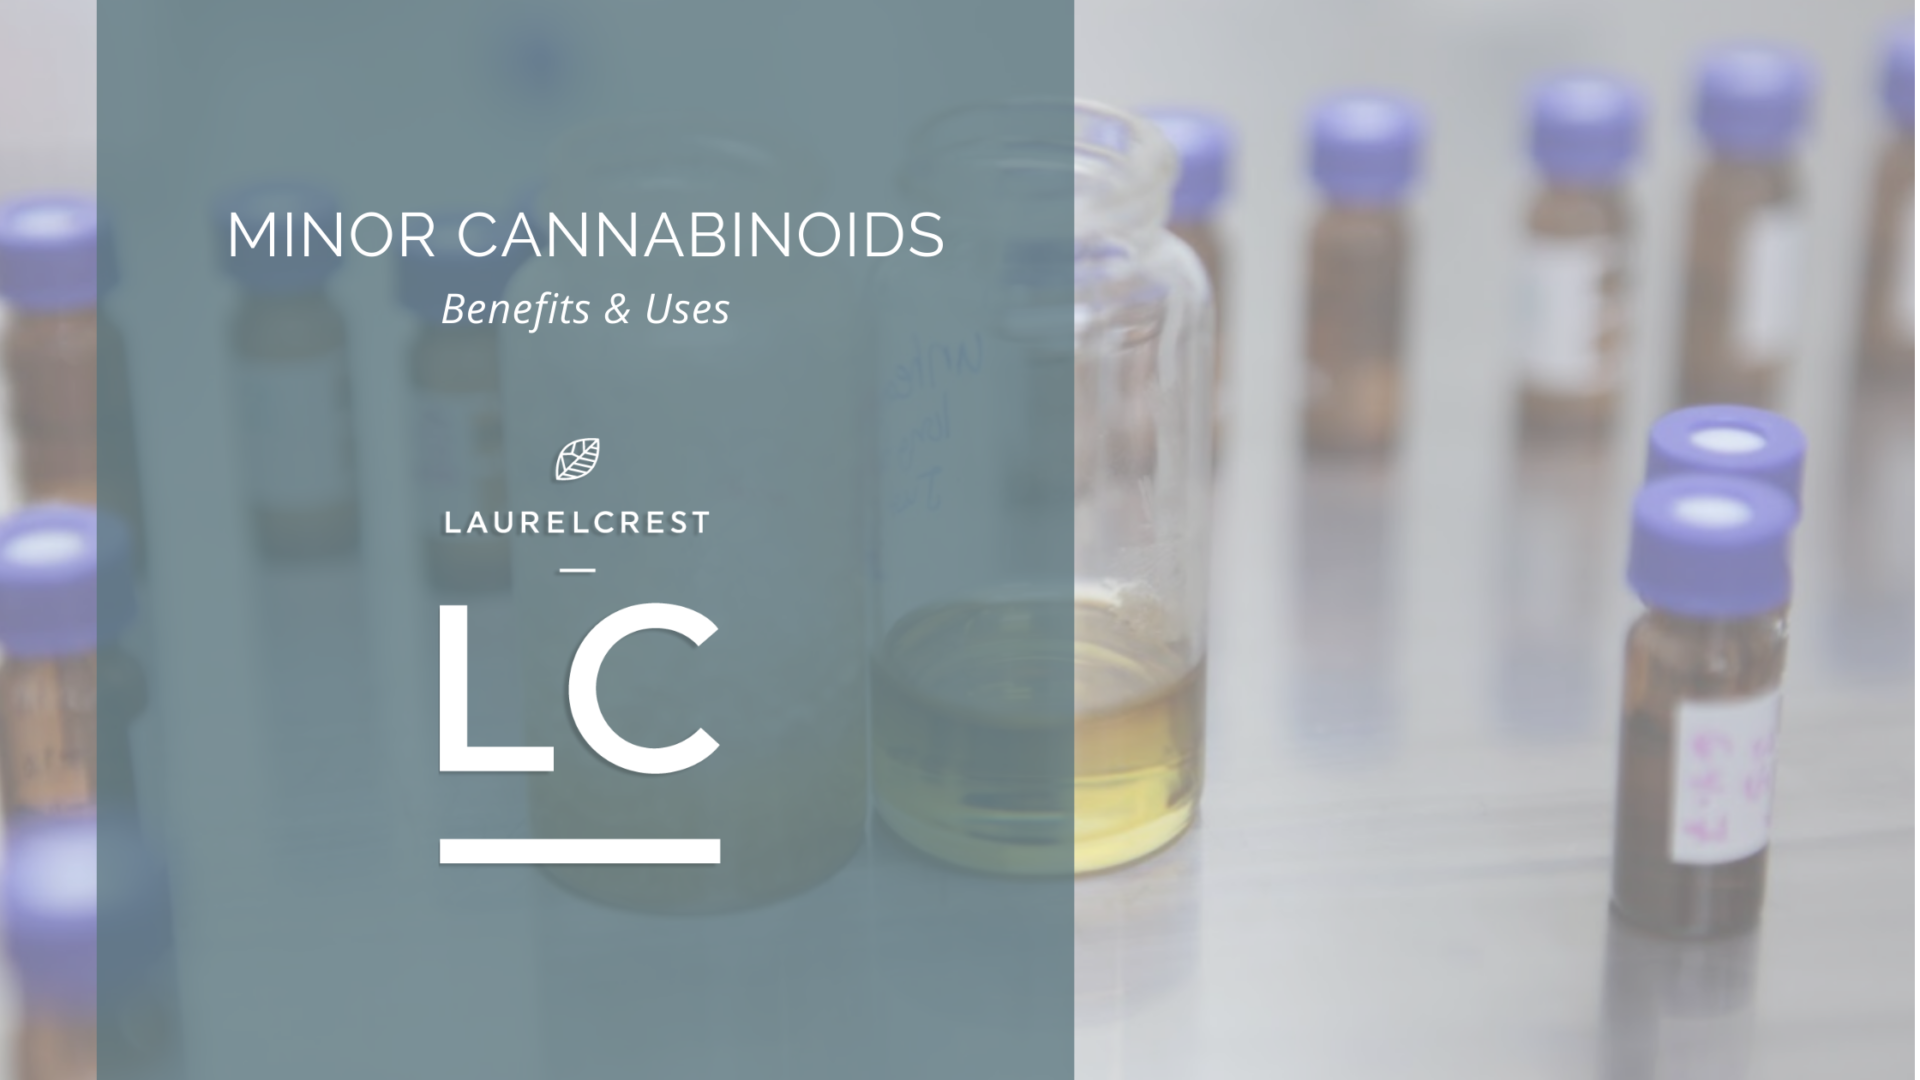 Can I Take Cbc Oil With Orilissa - Cbd|Oil|Cbc|Benefits|Effects|Pain|Thc|Products|Health|Study|Cannabinoids|Cannabis|Anxiety|Studies|Hemp|Research|Symptoms|People|Treatment|System|Plant|Body|Inflammation|Product|Evidence|Receptors|Cancer|Side|Effect|Properties|Brain|Dose|Disease|Marijuana|Cannabidiol|Disorders|Cannabinoid|Way|Relief|Cells|Cbd Oil|Cbc Oil|Cbd Products|Side Effects|Endocannabinoid System|Chronic Pain|Cannabis Plant|Pain Relief|Cbd Oil Benefits|Cannabis Oil|Health Benefits|Multiple Sclerosis|Hemp Plant|Anti-Inflammatory Properties|Blood Pressure|Entourage Effect|Neuropathic Pain|Cbd Product|Hemp Oil|Full-Spectrum Cbd Oil|Nervous System|Hemp Seed Oil|High Blood Pressure|Immune System|Cbd Gummies|Cannabis Oil Benefits|Drug Administration|Anxiety Disorders|Dravet Syndrome|Lennox-Gastaut Syndrome